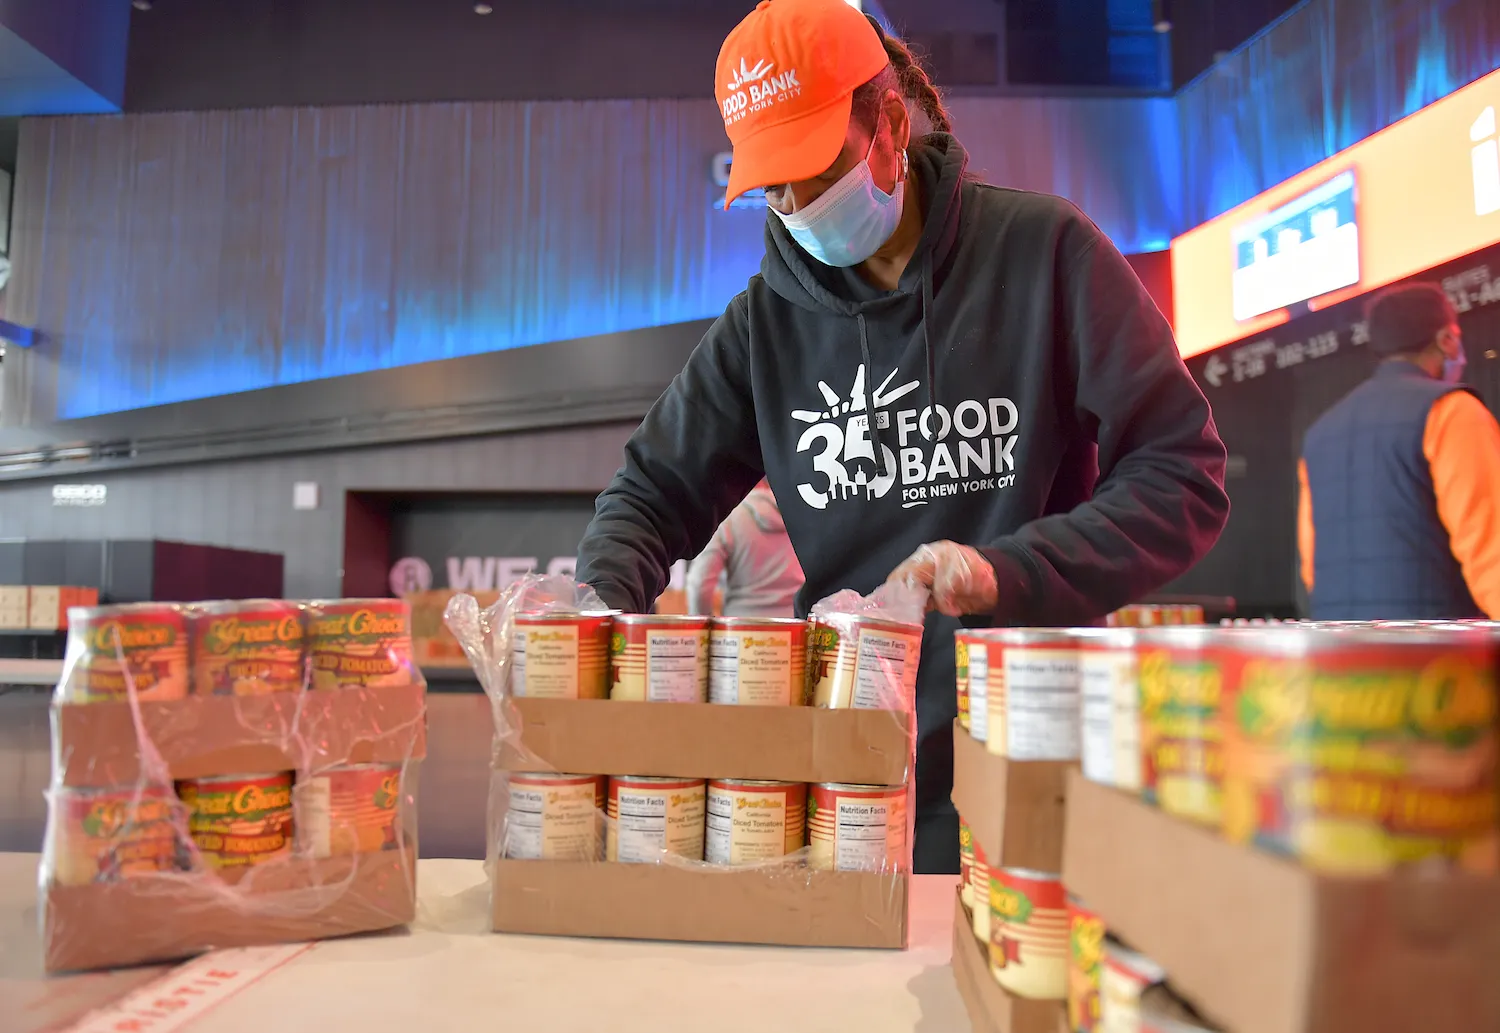 A woman unpacks canned food at a food bank in New York City.